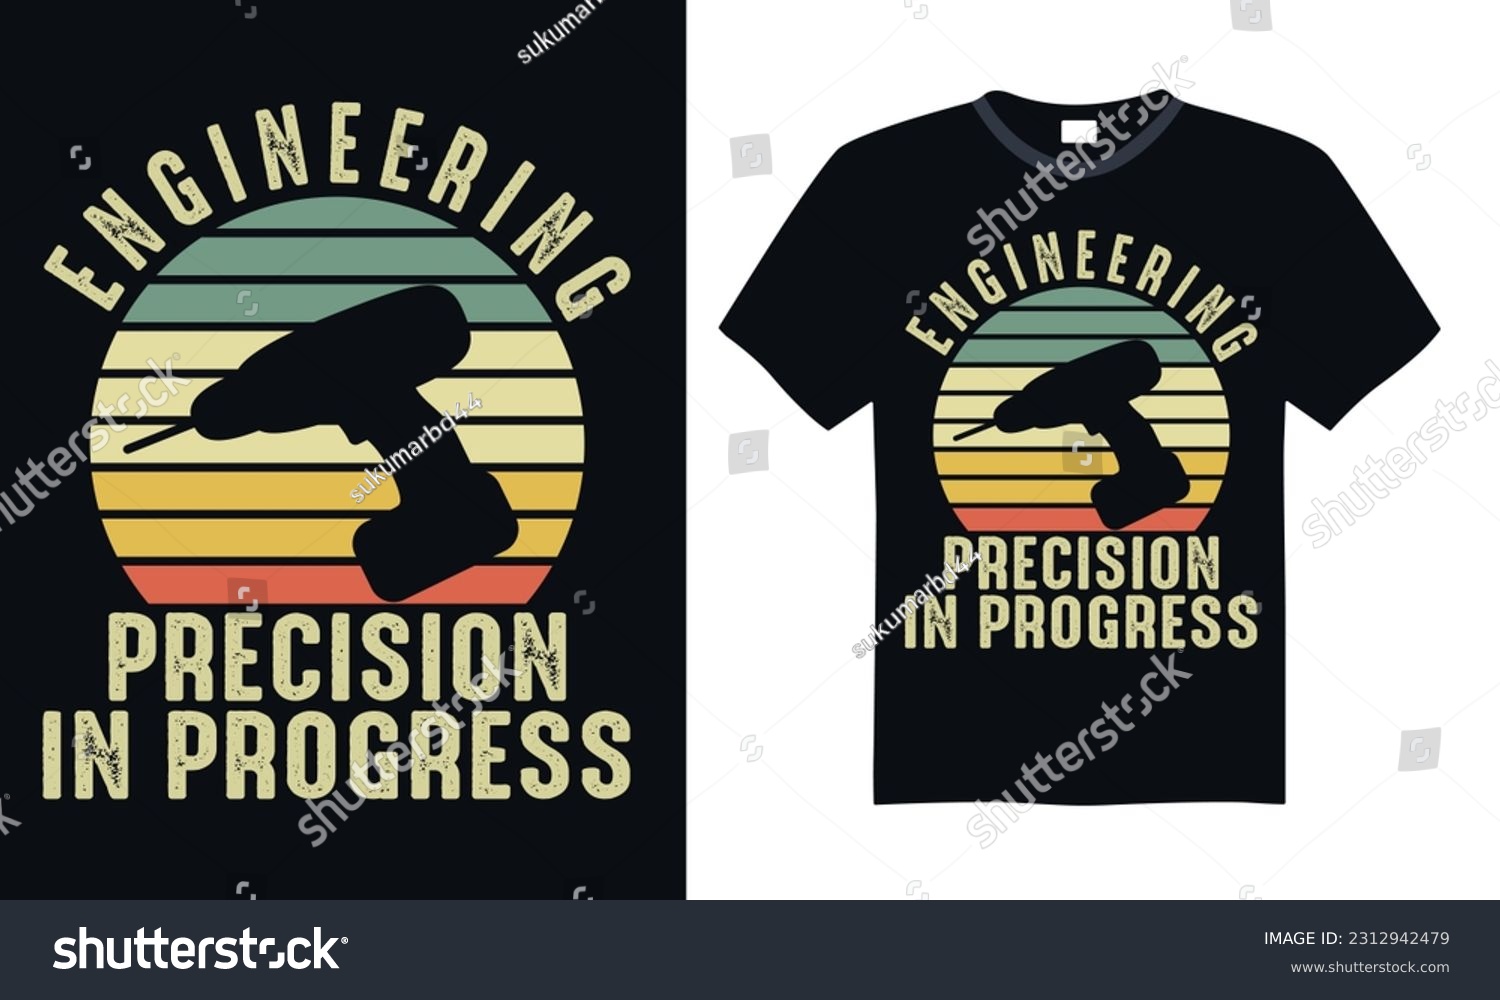 SVG of Engineering Precision in Progress - Engineering T-shirt Design, SVG Files for Cutting, Handmade calligraphy vector illustration, Hand written vector sign svg